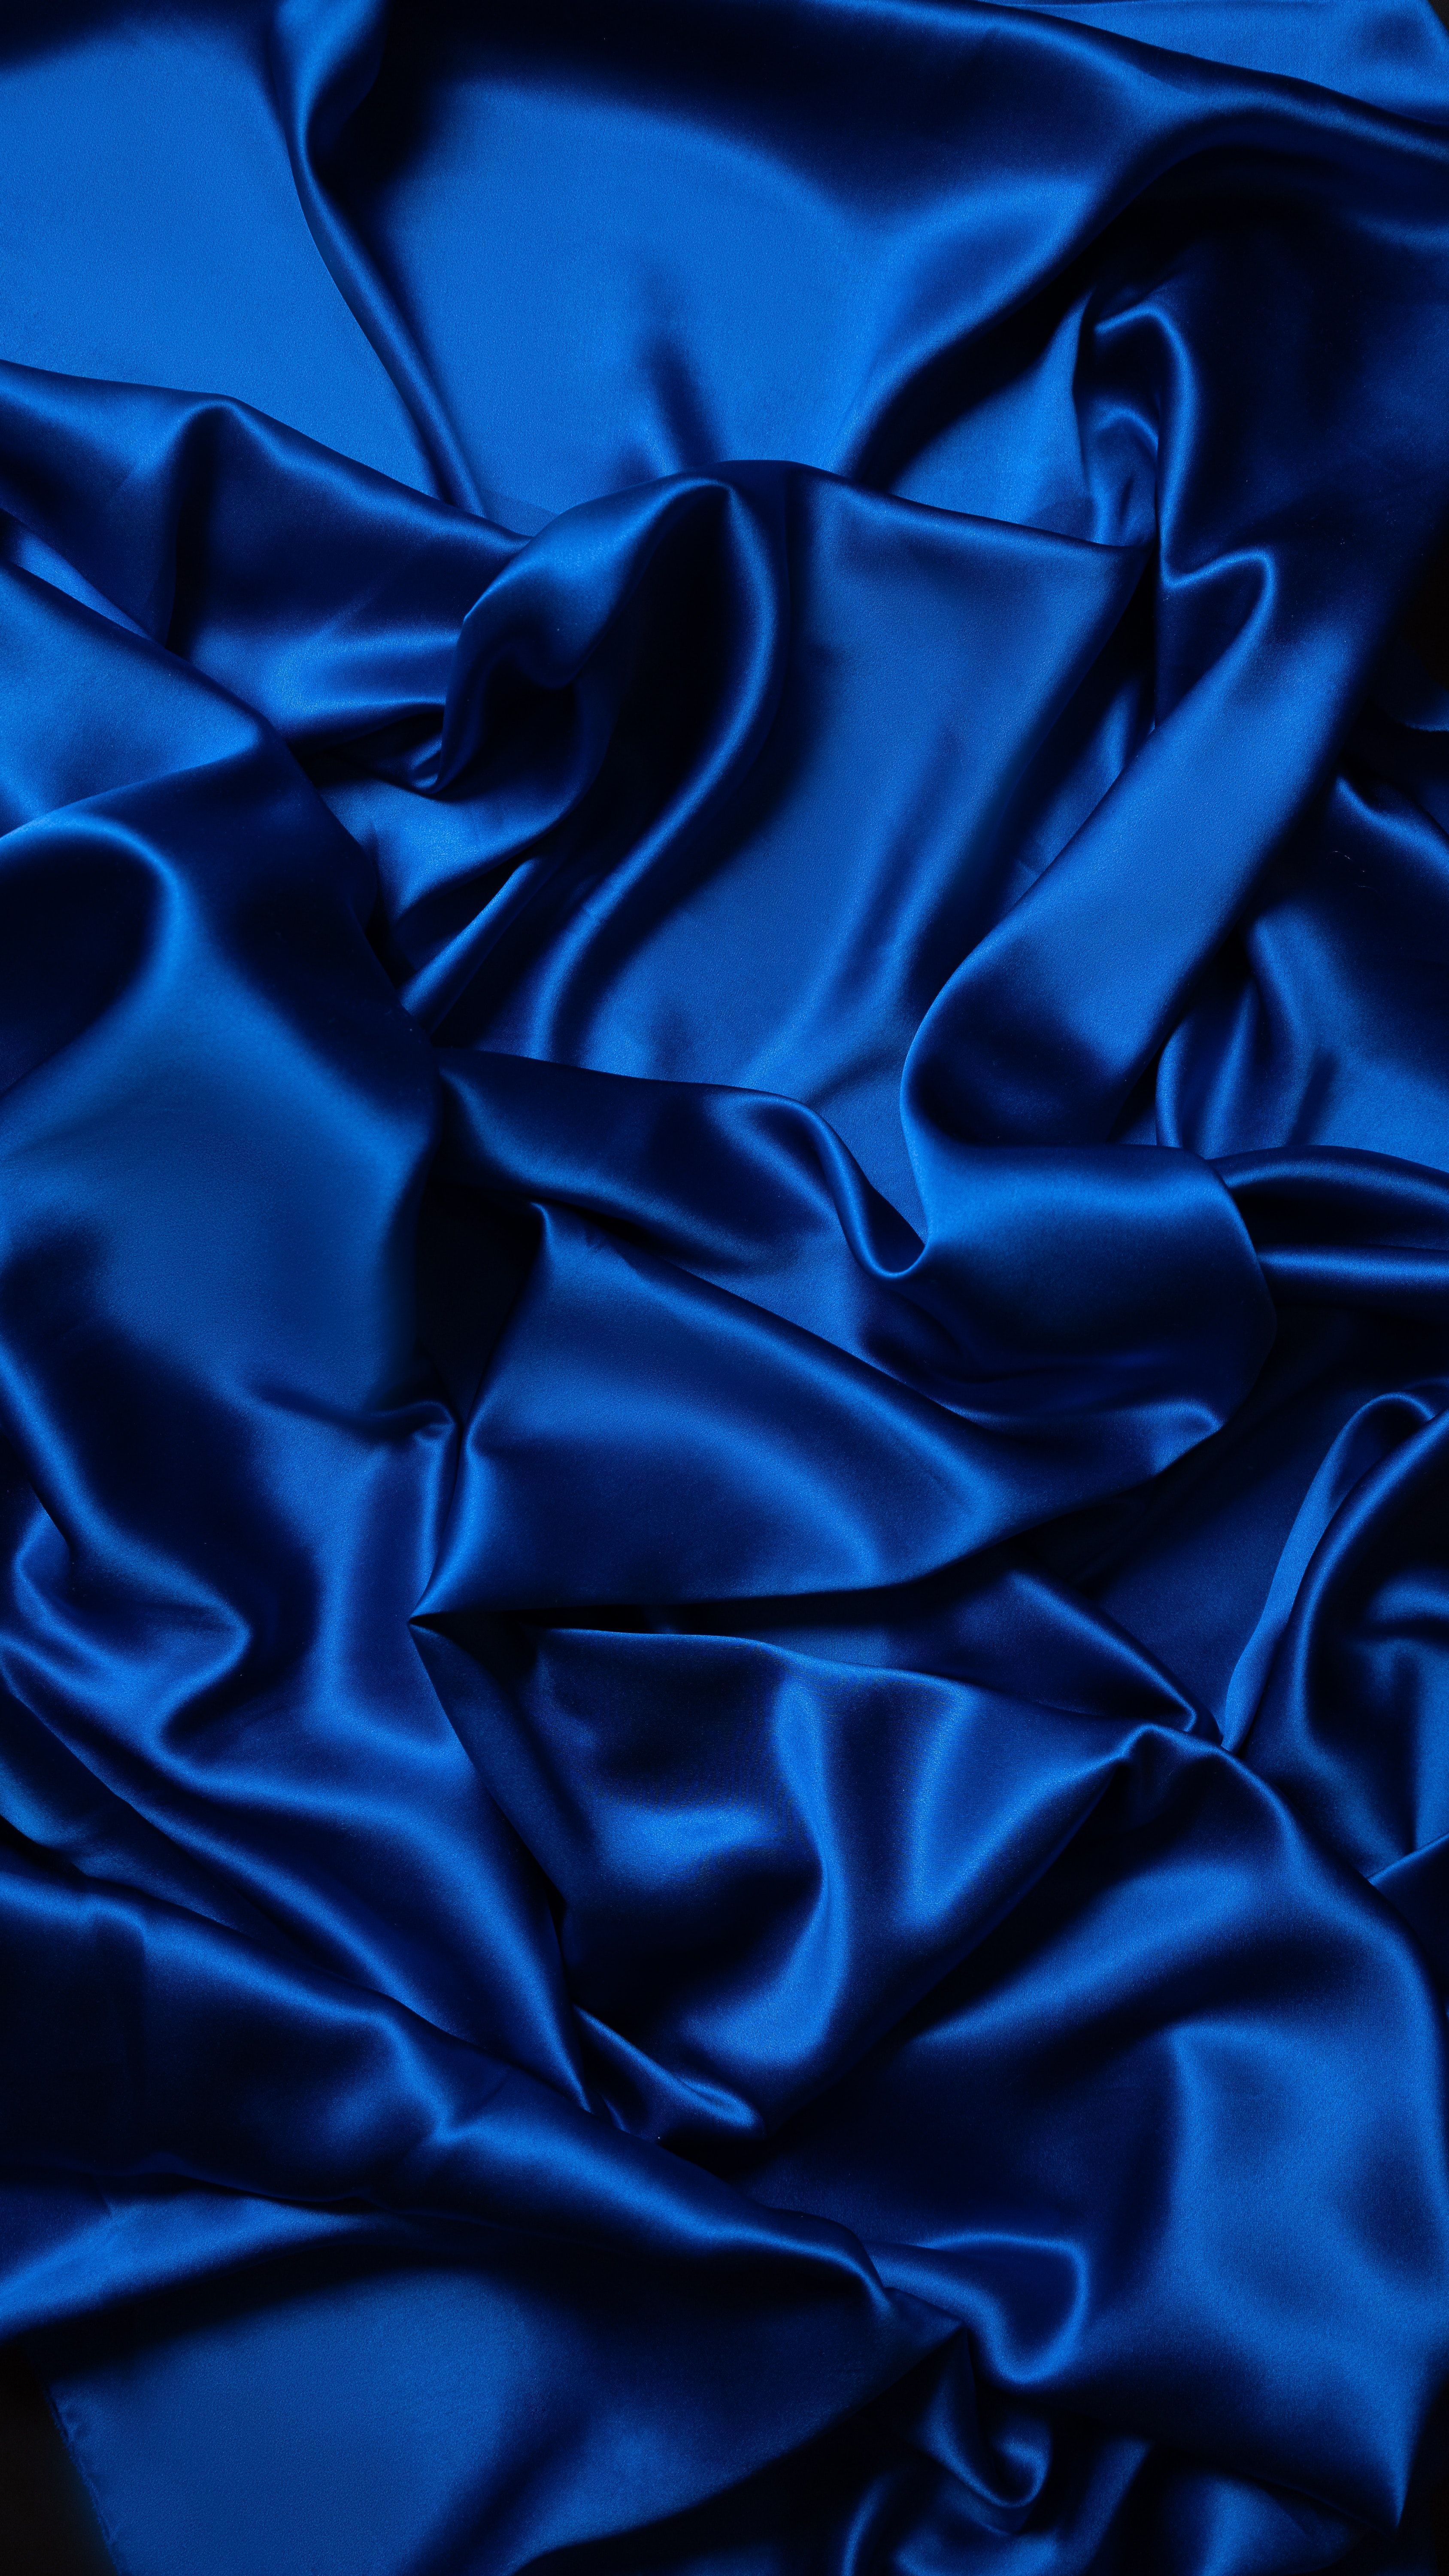 Download The BEST Free Silk Fabric & HD Image. - Silk